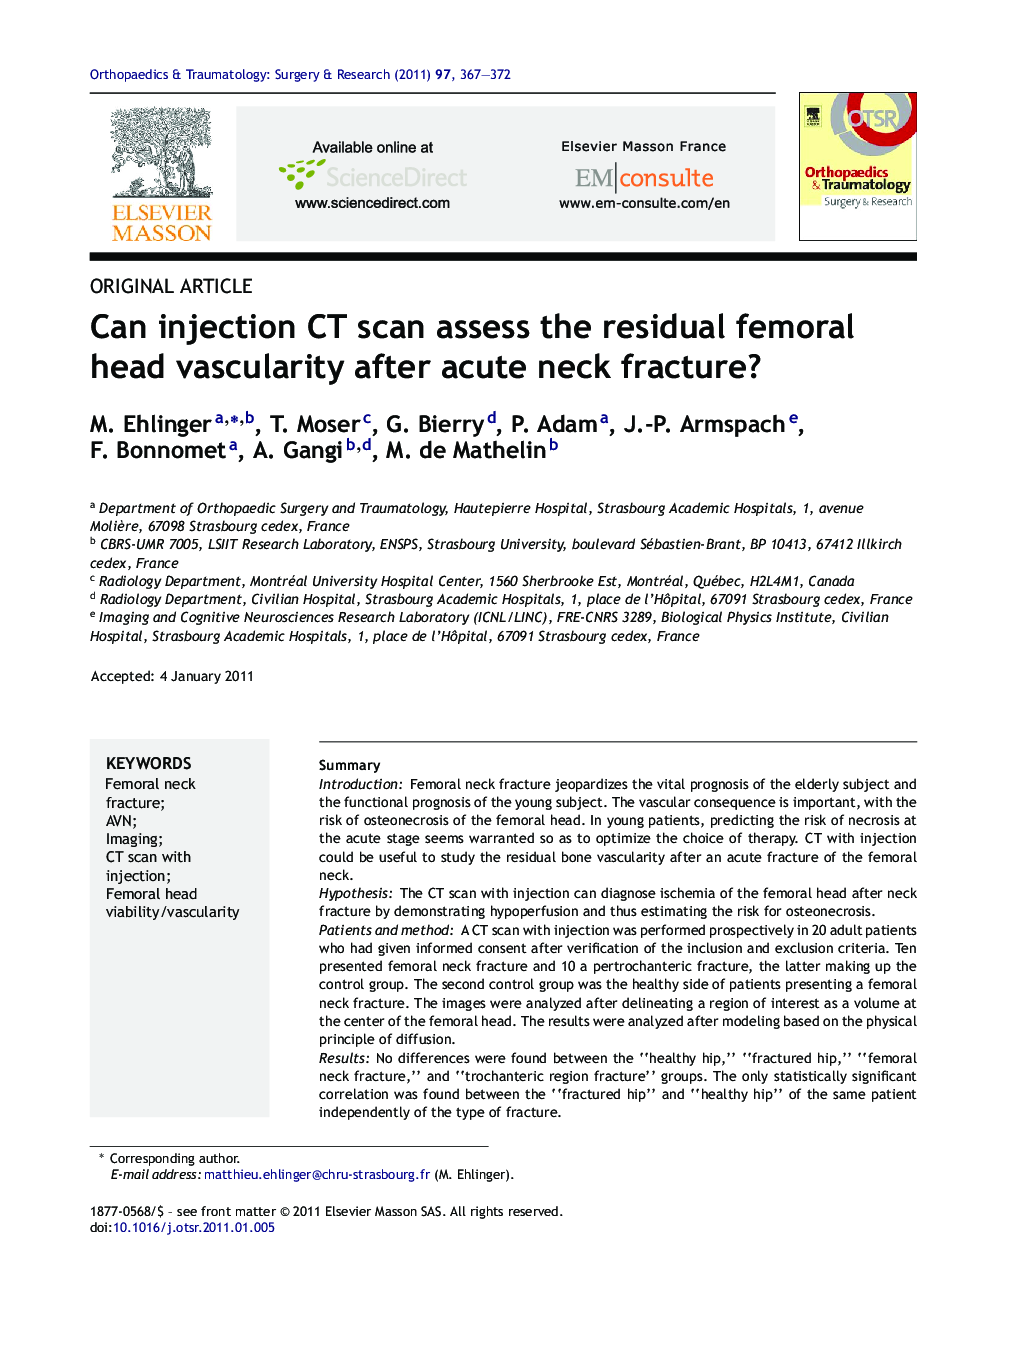 Can injection CT scan assess the residual femoral head vascularity after acute neck fracture?